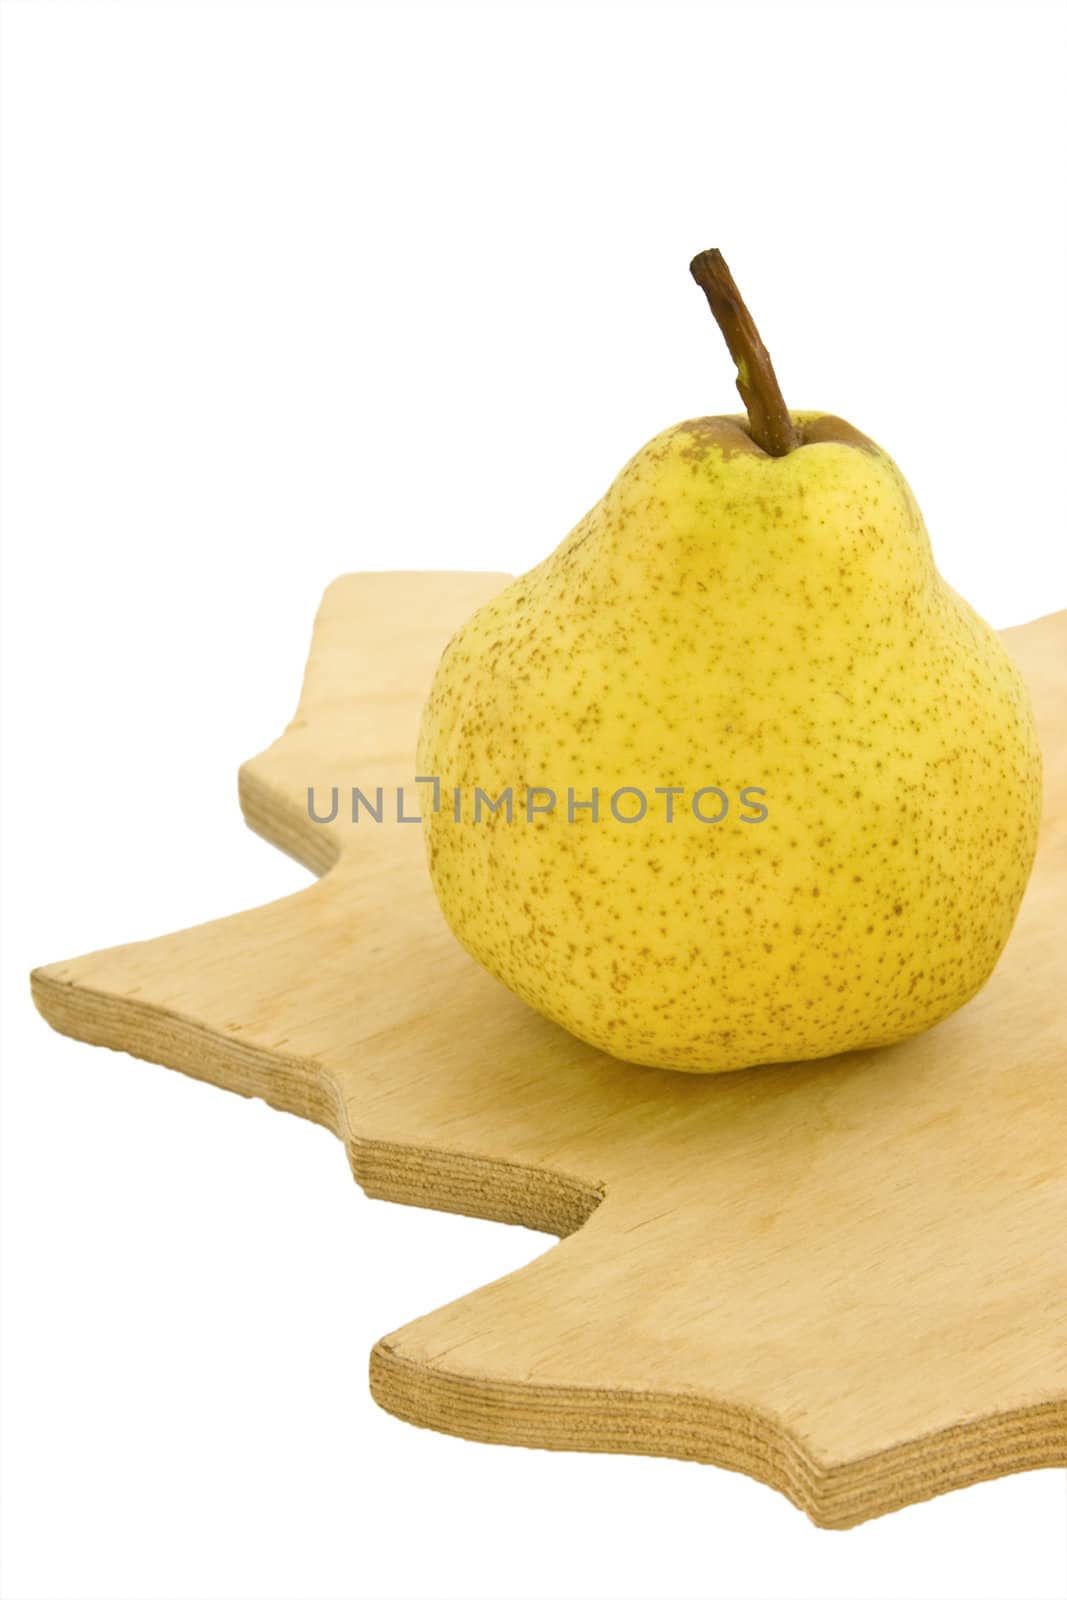 Pear on isolated white background